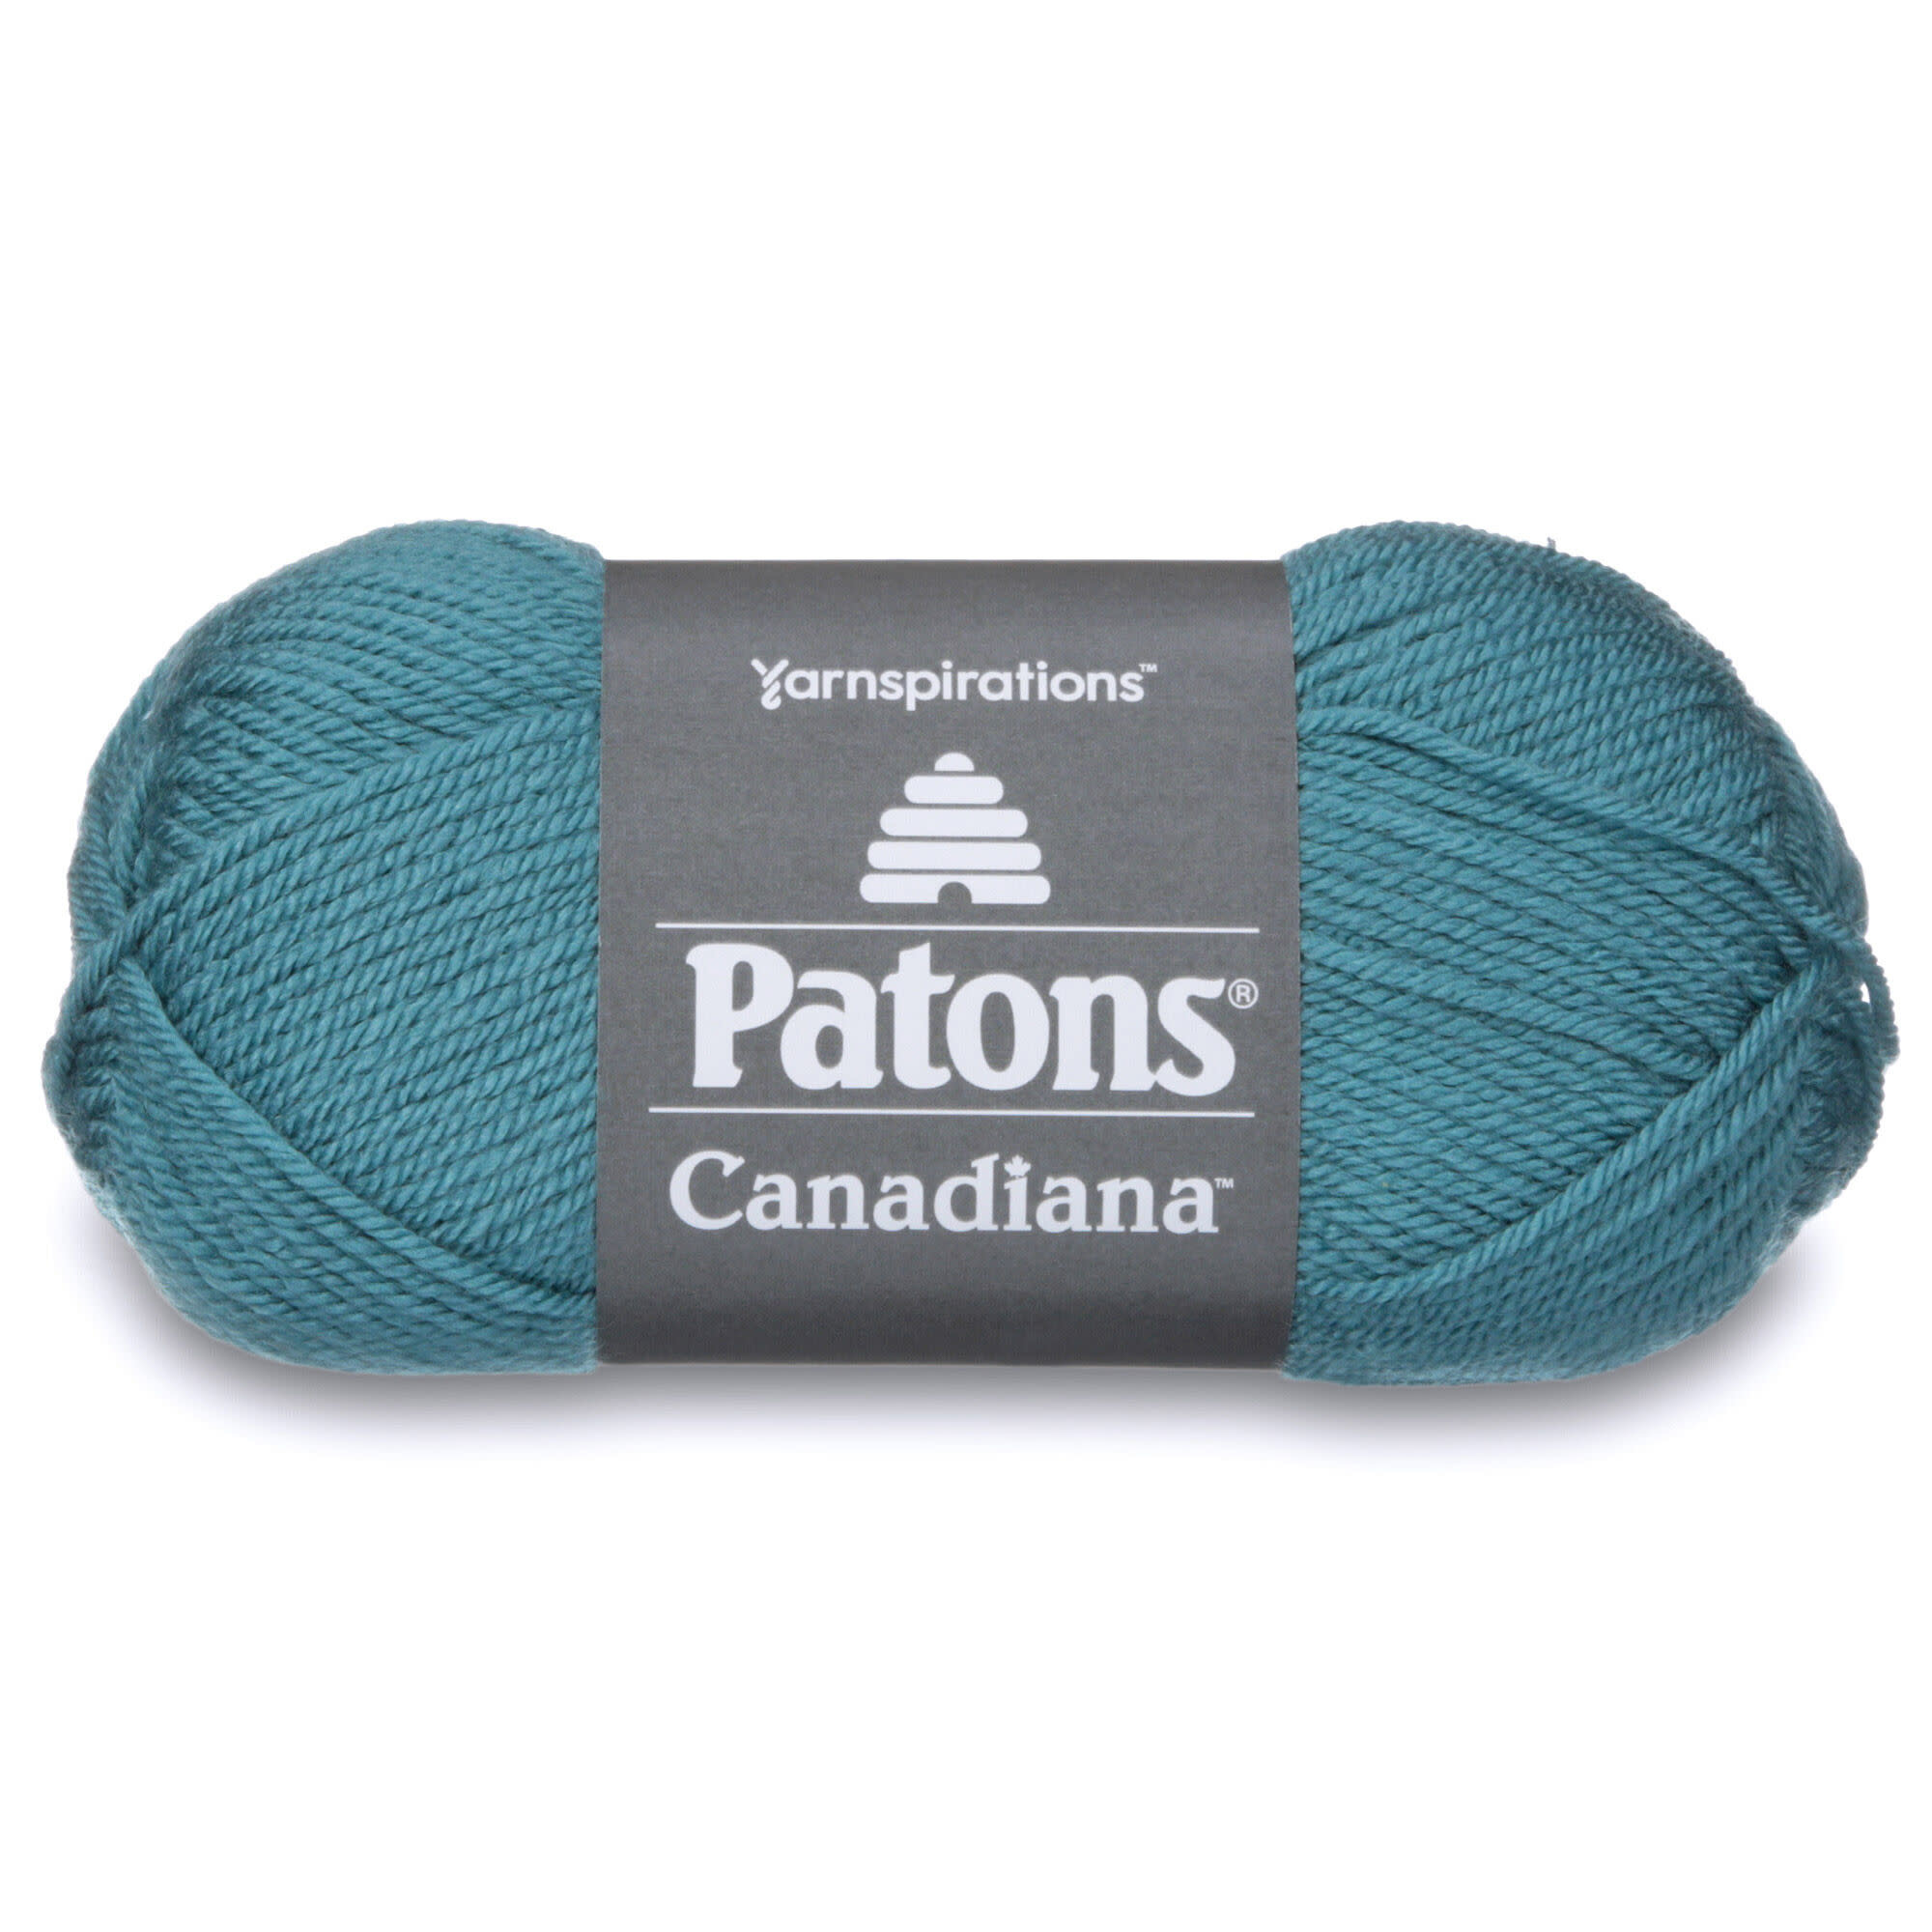 Patons Canadiana - Med Teal/744